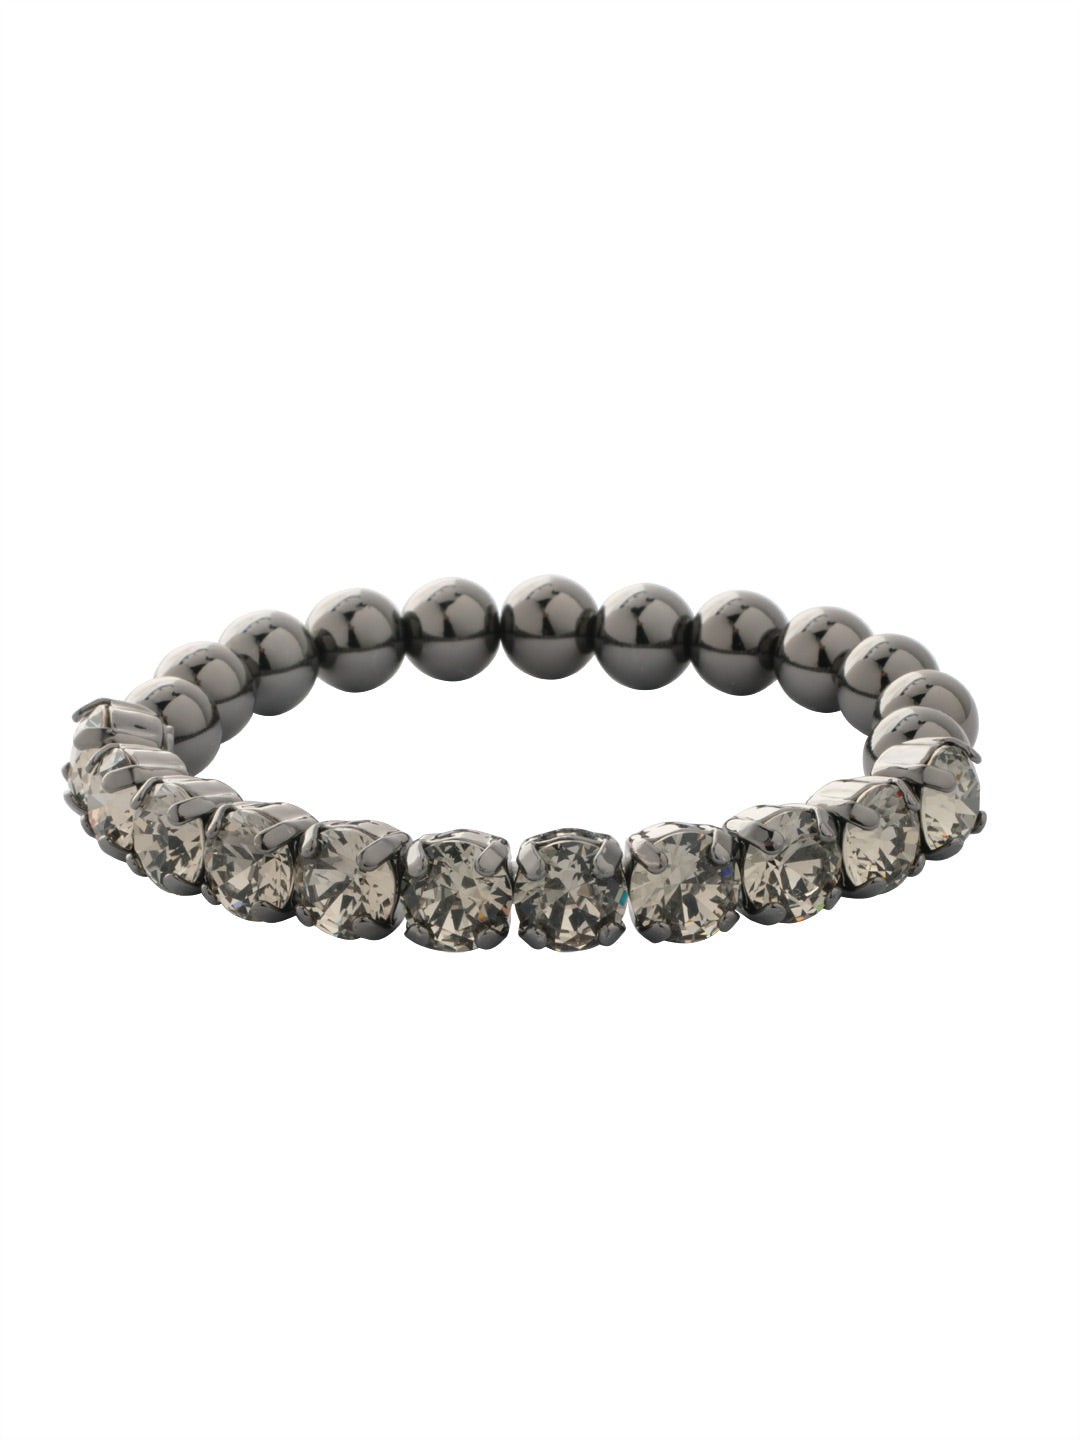 Crystal Zola Stretch Bracelet - 4BFJ40GMBD - <p>Crystal Zola Stretch Bracelet features a side of repeating metal beads and a side of round cut crystals on a multi-layered stretchy jewelry filament, creating a durable and trendy piece. From Sorrelli's Black Diamond collection in our Gun Metal finish.</p>